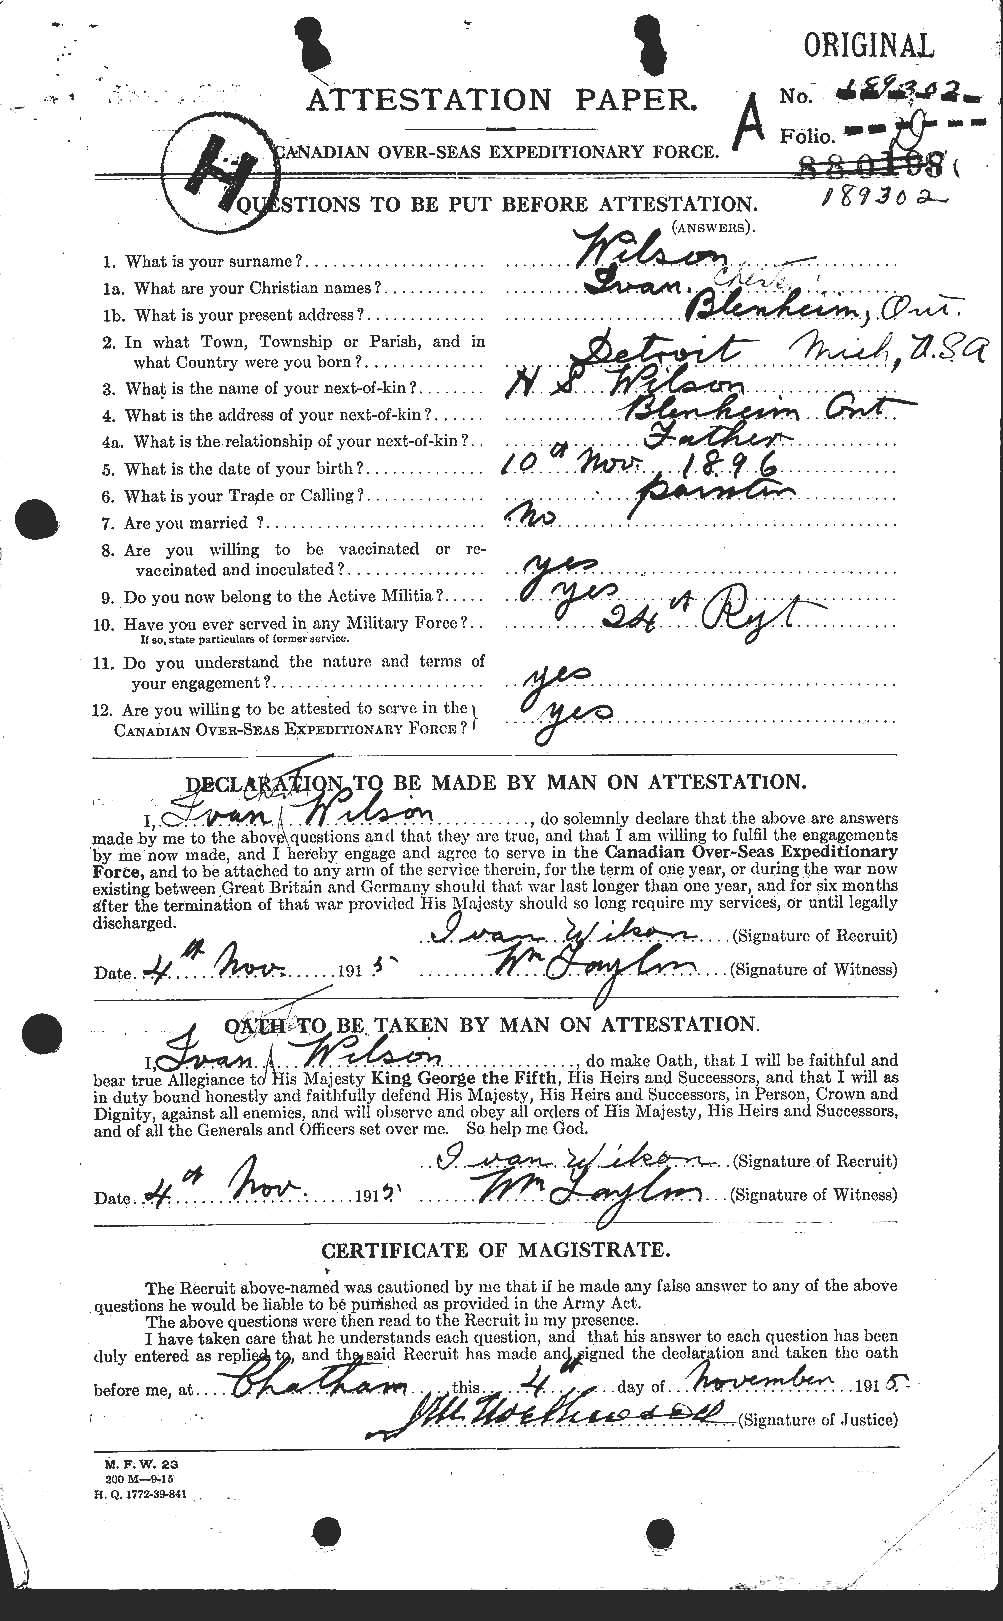 Personnel Records of the First World War - CEF 679631a